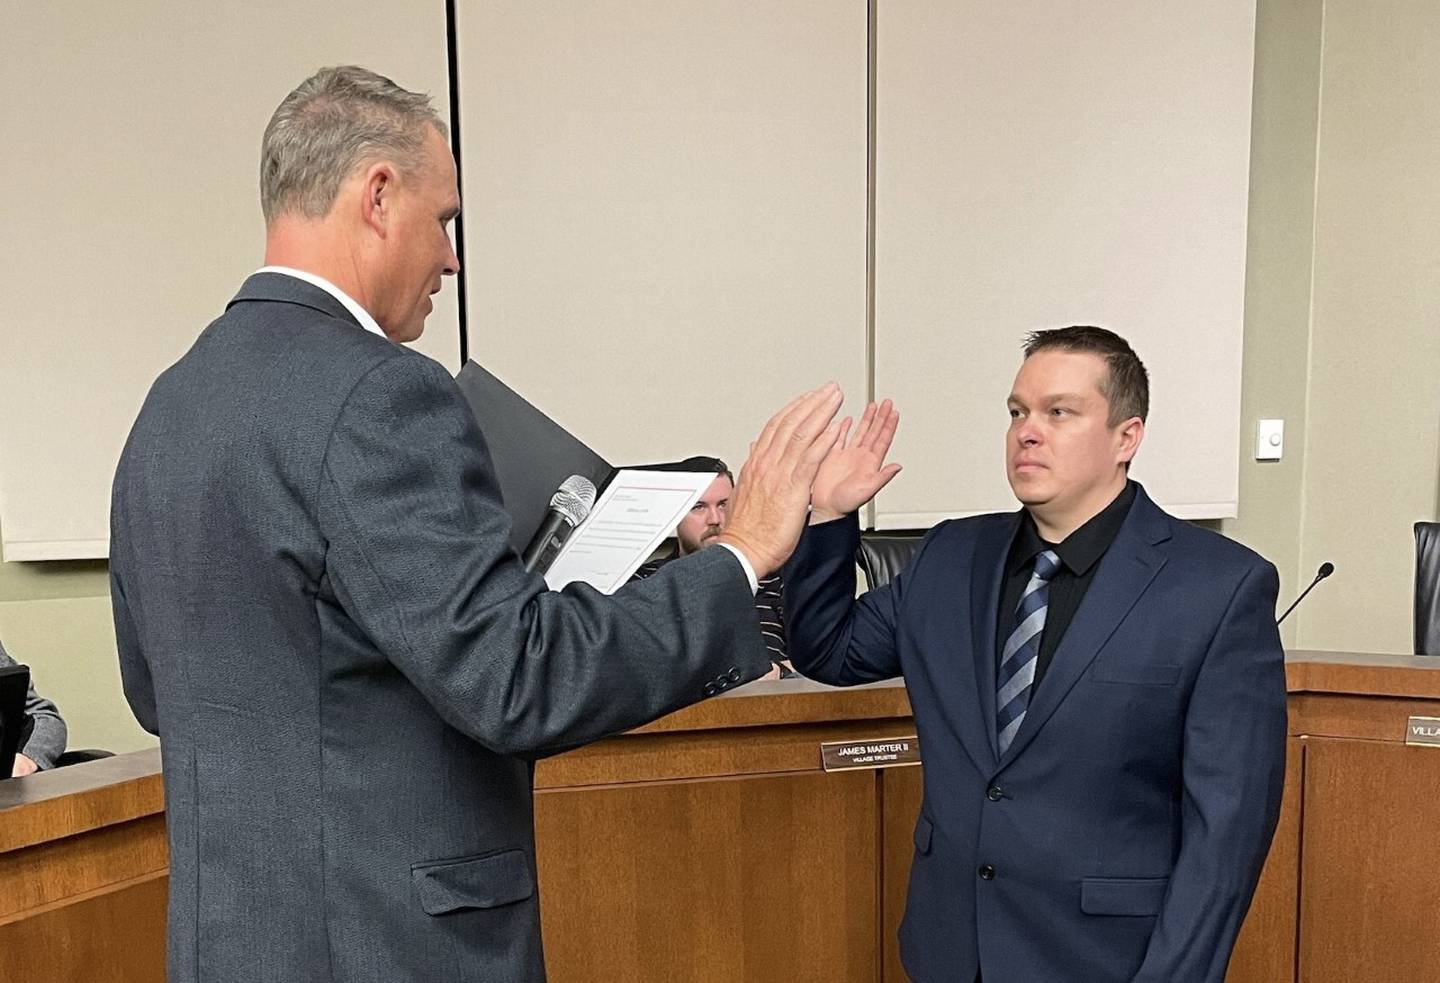 Officer Aaron Riley (right) was sworn-in as the Oswego Police Department's 52nd officer by Village President Troy Parlier (left) during a Village Board meeting on Jan. 12, 2023 at Village Hall in Oswego.